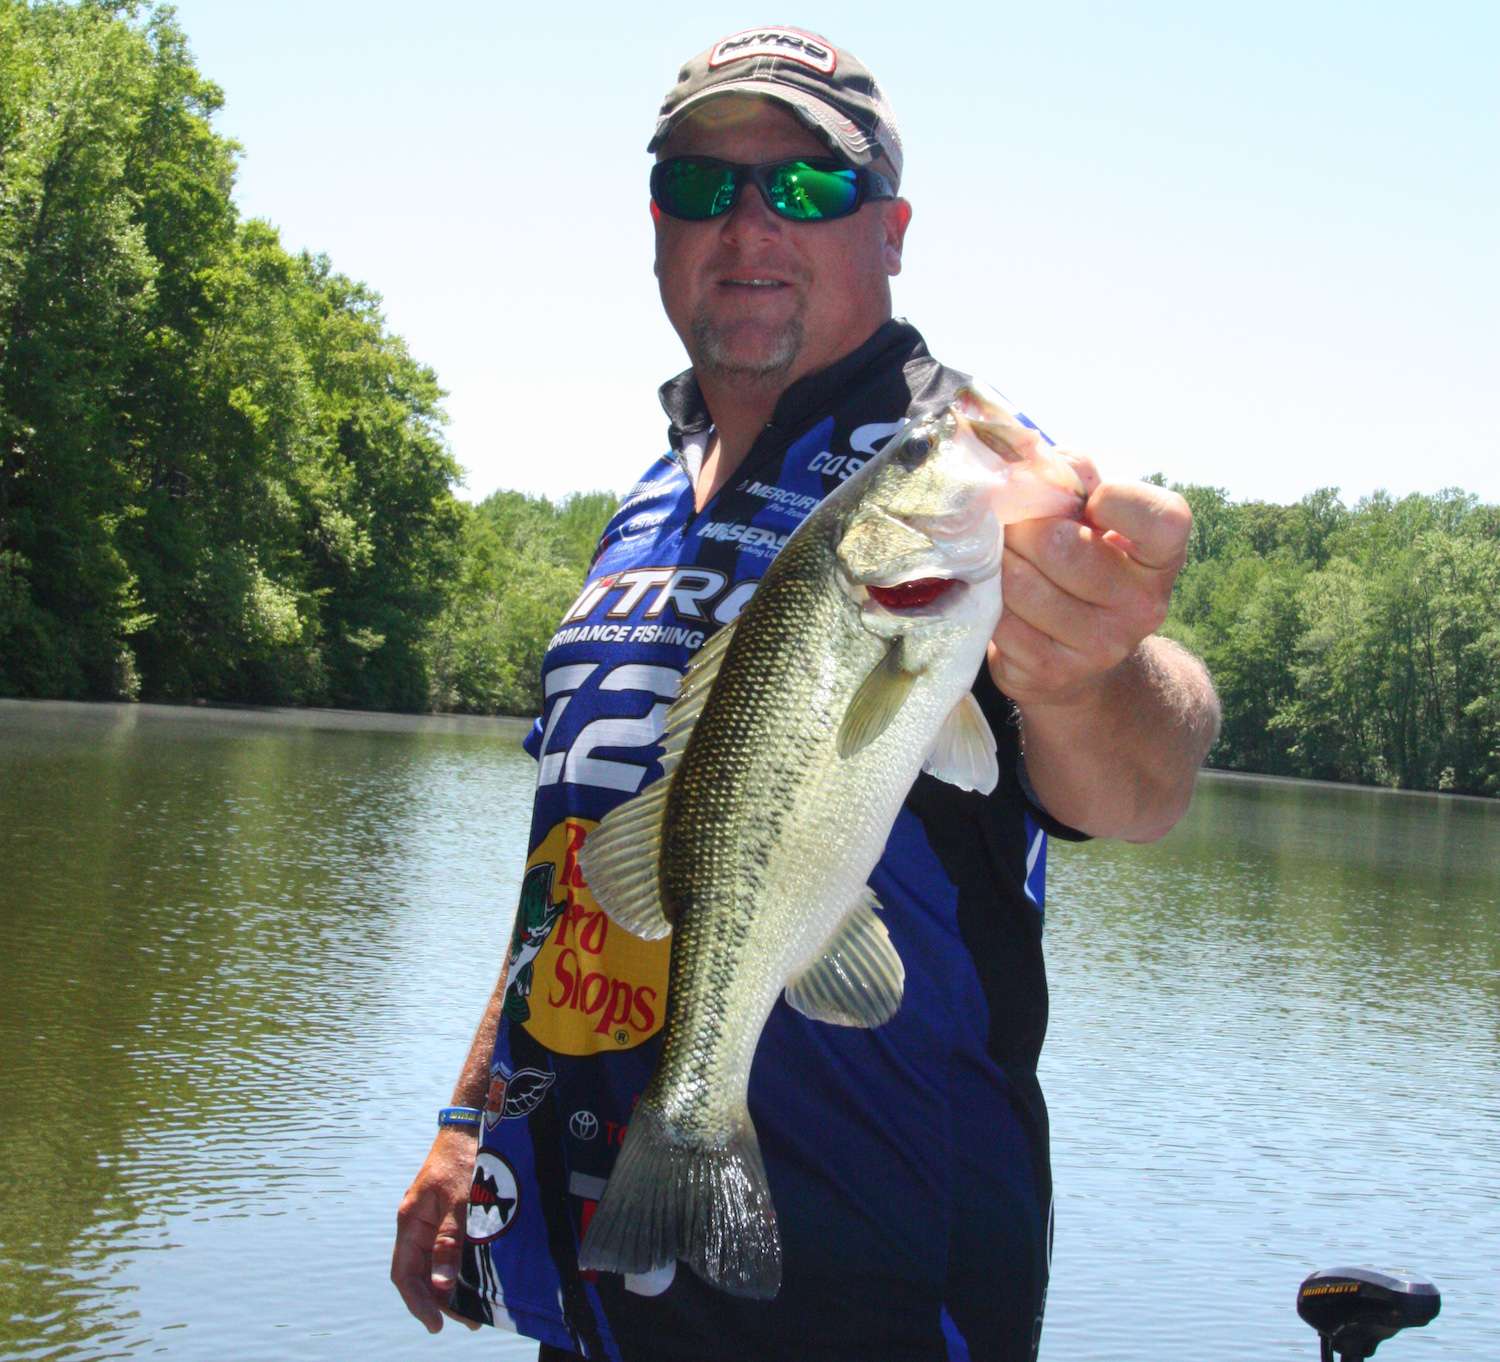 <b>1:36 p.m.</b> Hartman hops the jig across a mud point and bags his eighth keeper, 2 pounds, 4 ounces; it culls the 1-3 he caught earlier. <br>
<b>1:42 p.m.</b> He casts the jig to a steep channel bank but hauls water. <br>
<b>1:55 p.m.</b> Hartmanâs time is up. He ends his day on Lake L with eight keeper bass; the five biggest weigh 13 pounds even.
